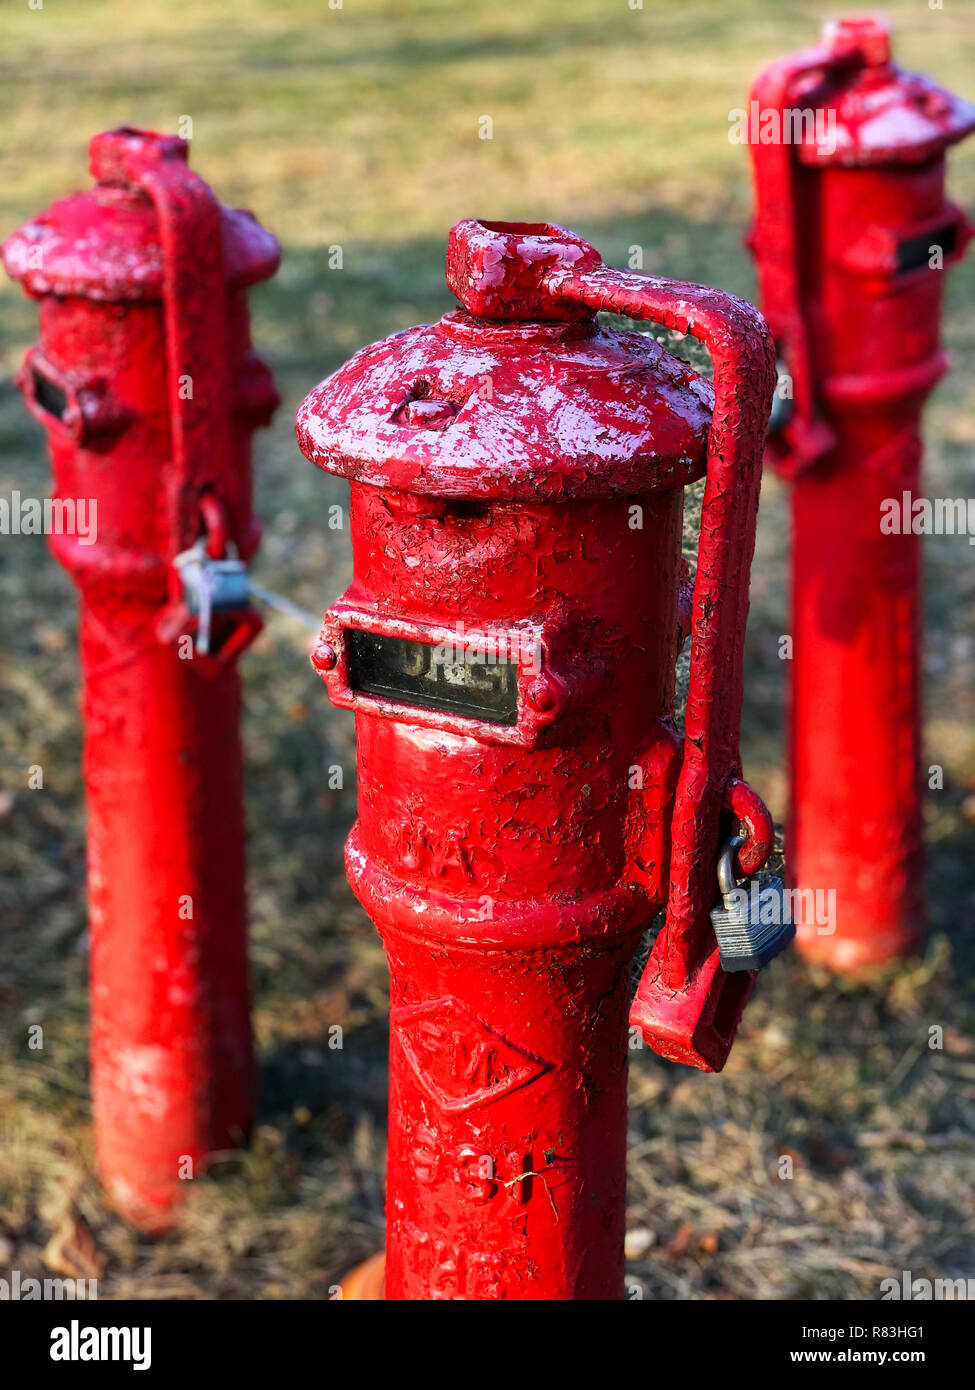 How Effectively Do Fire Hydrant Systems Work?